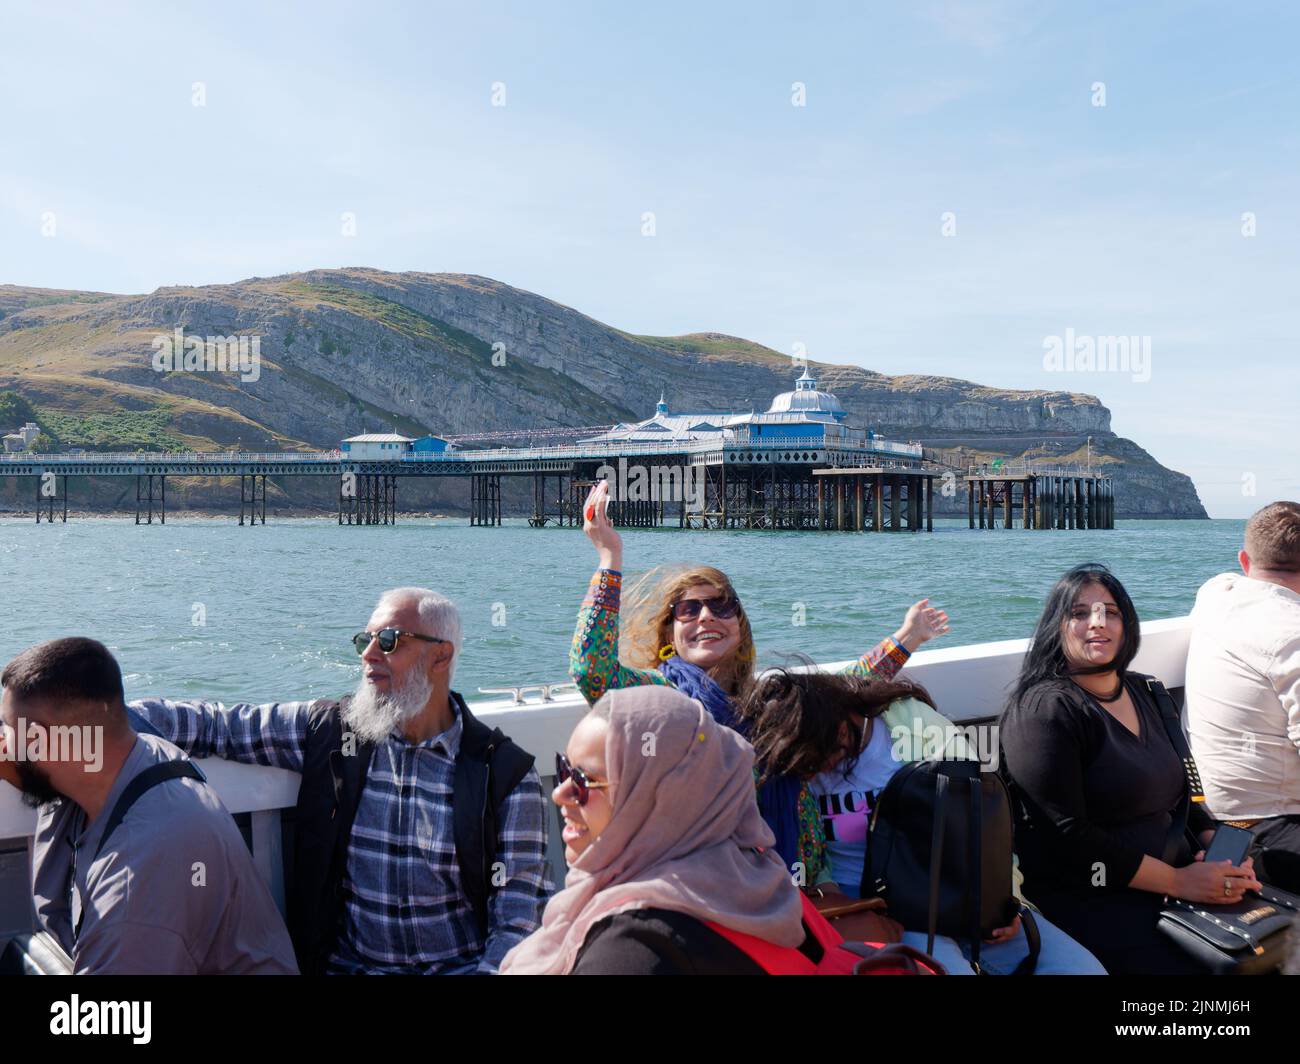 Llandudno, Clwyd, Wales, August 07 2022: Tourists enjoying a boat trip with the pier and Great Orme in the background Stock Photo